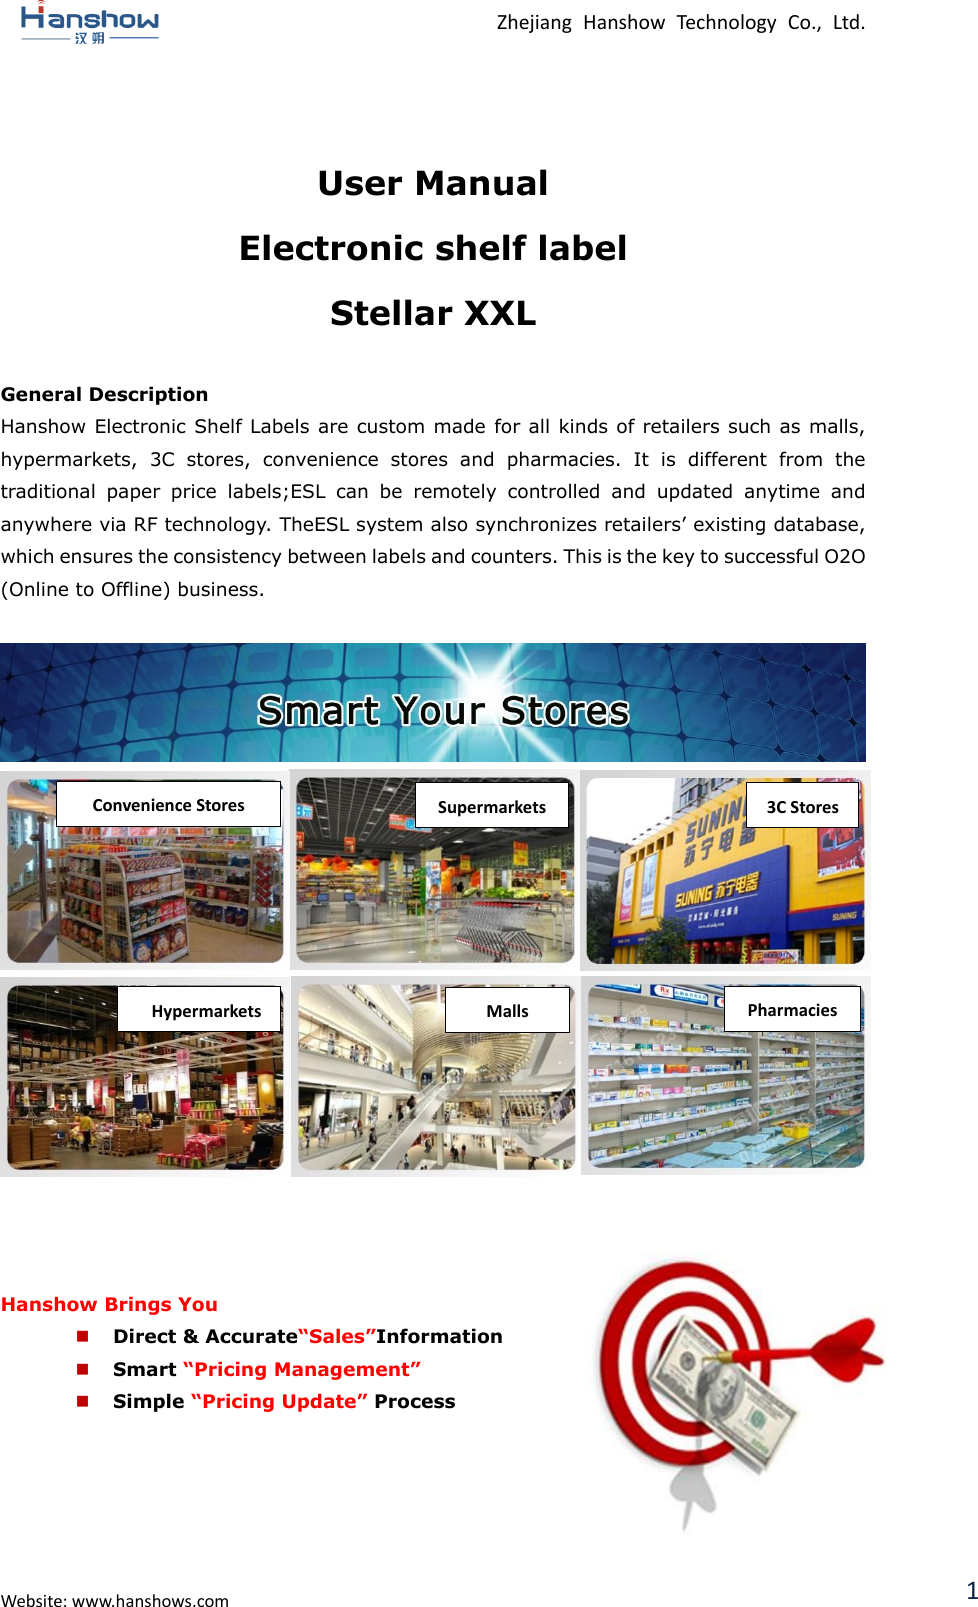  Zhejiang  Hanshow  Technology  Co.,  Ltd.   Website: www.hanshows.com 1  User Manual Electronic shelf label Stellar XXL  General Description Hanshow Electronic Shelf Labels are custom made for all kinds of retailers such as malls, hypermarkets,  3C  stores,  convenience  stores  and  pharmacies.  It  is  different  from  the traditional  paper  price  labels;ESL  can  be  remotely  controlled  and  updated  anytime  and anywhere via RF technology. TheESL system also synchronizes retailers’ existing database, which ensures the consistency between labels and counters. This is the key to successful O2O (Online to Offline) business.                     Hanshow Brings You  Direct &amp; Accurate“Sales”Information  Smart “Pricing Management”  Simple “Pricing Update” Process      Convenience Stores Supermarkets 3C Stores Pharmacies Malls Hypermarkets G-MALL 